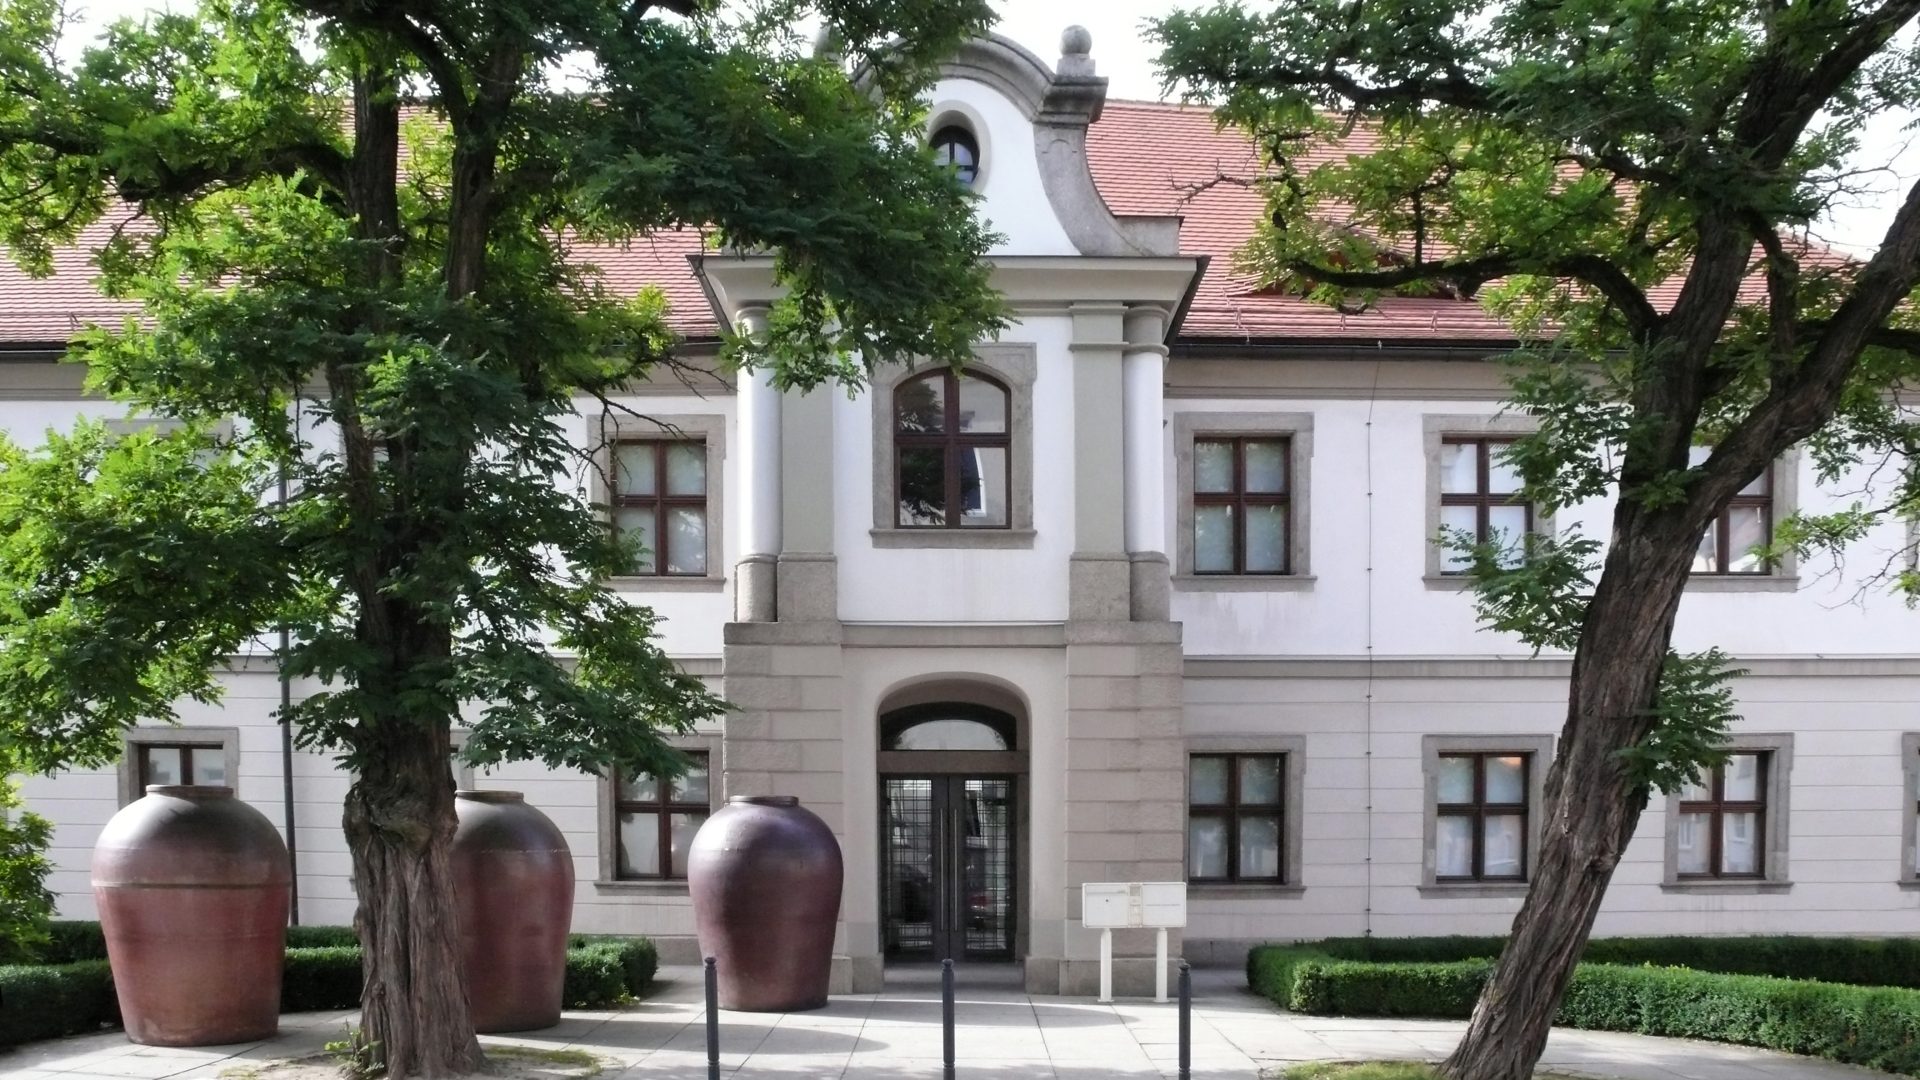 Exterior view of Museum Weiden, entrance: gray-white neo-baroque building with trees in front of it